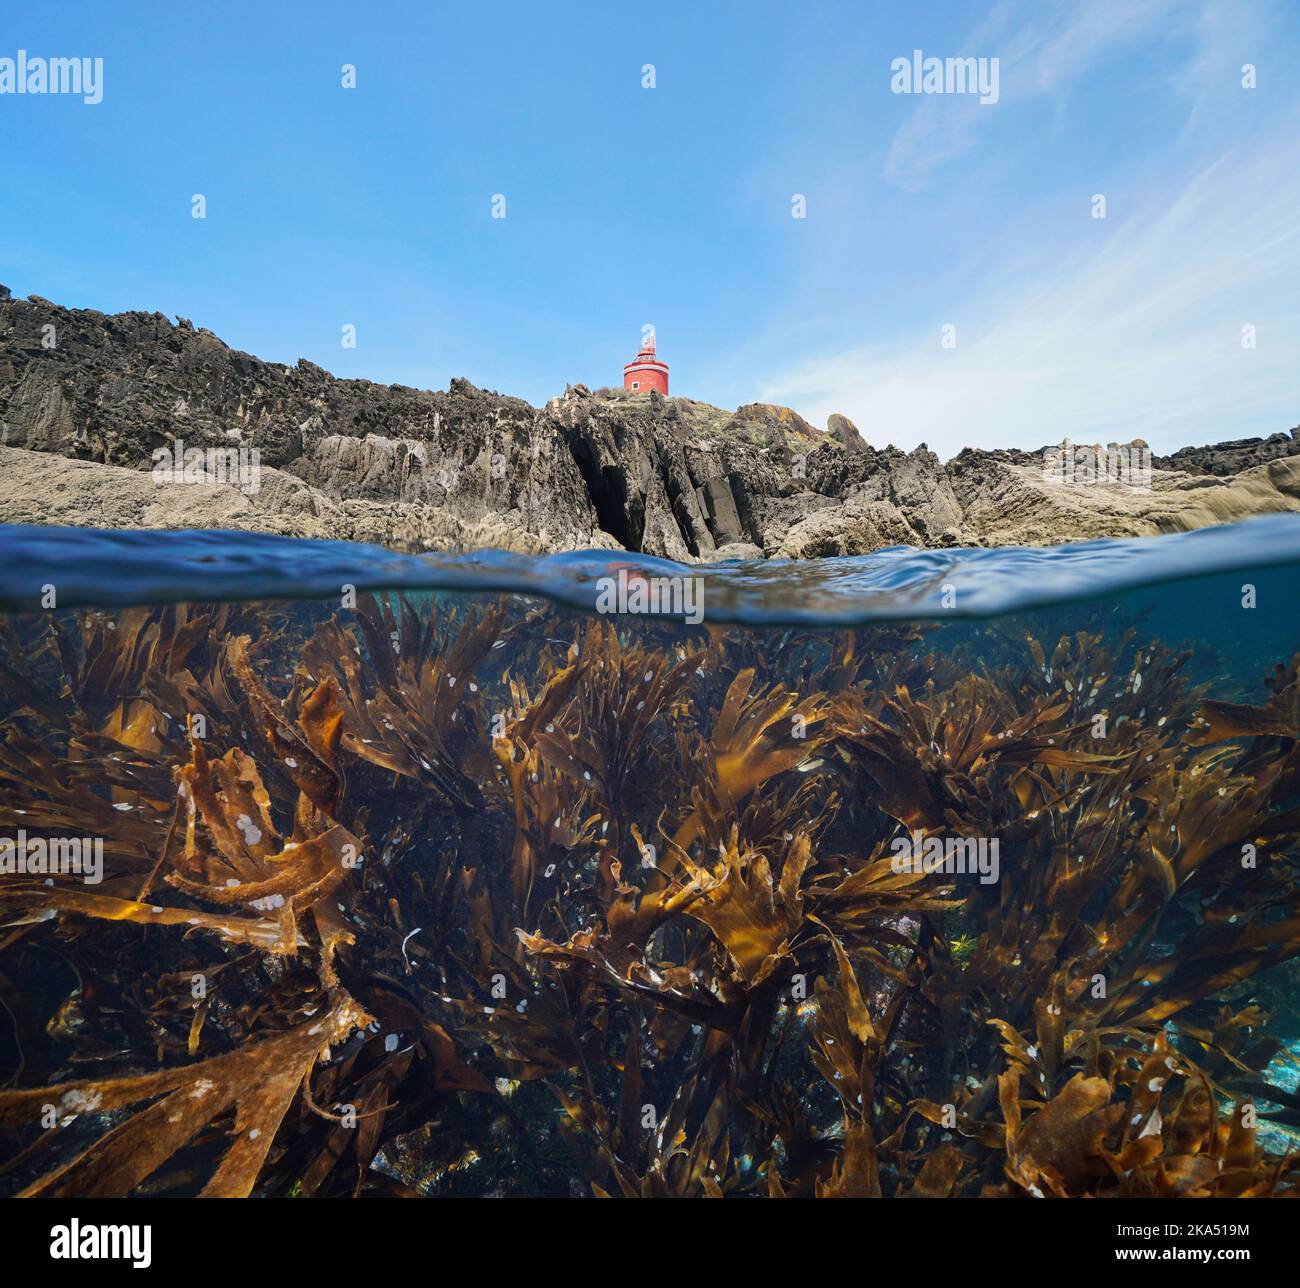 Rocky coast with a lighthouse and kelp underwater, split level view over and under water surface, Atlantic ocean, Spain, Galicia, Rias Baixas Stock Photo